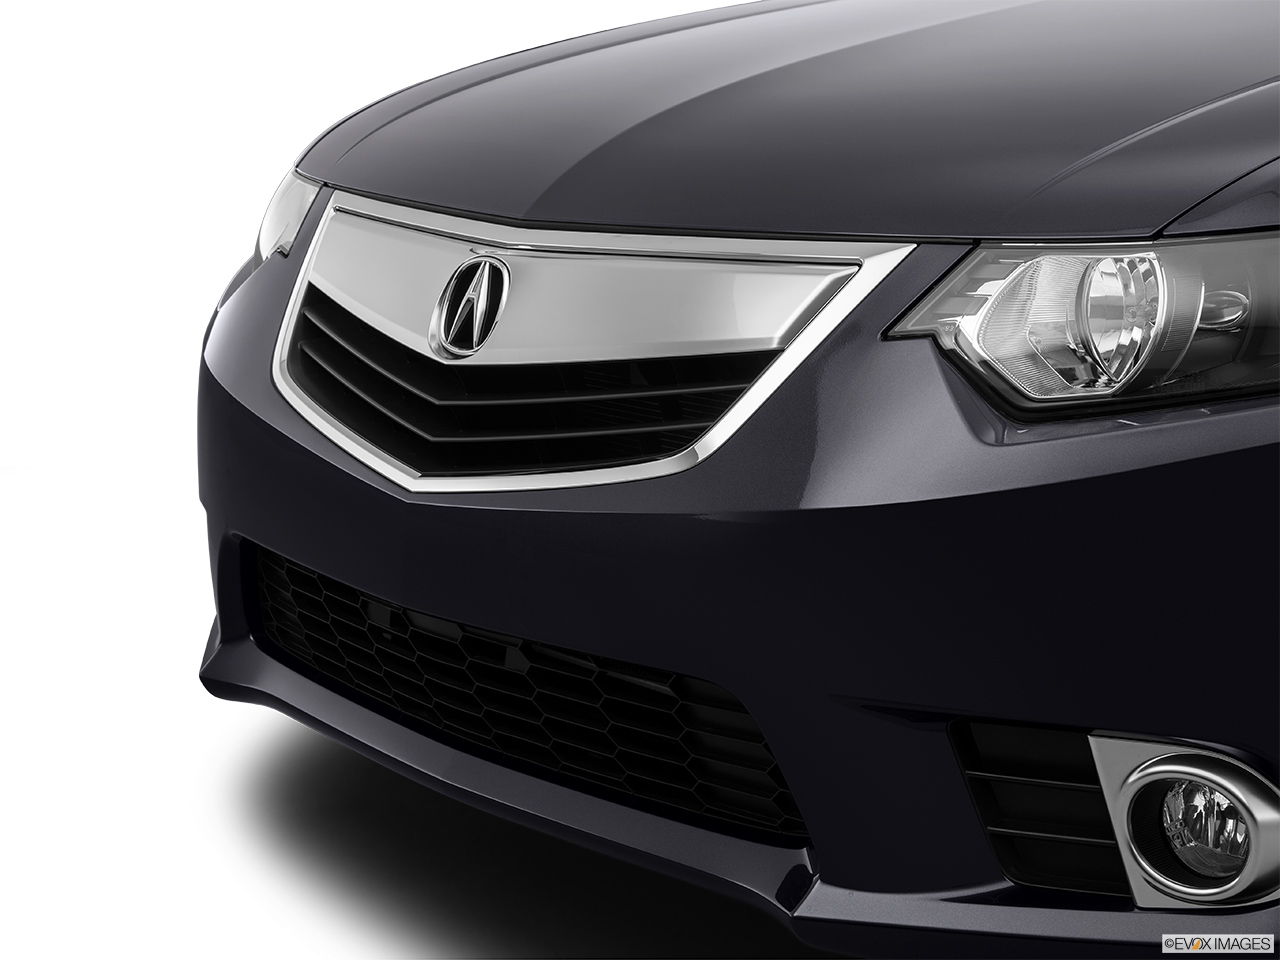 2014 Acura TSX 5-Speed Automatic Close up of Grill. 